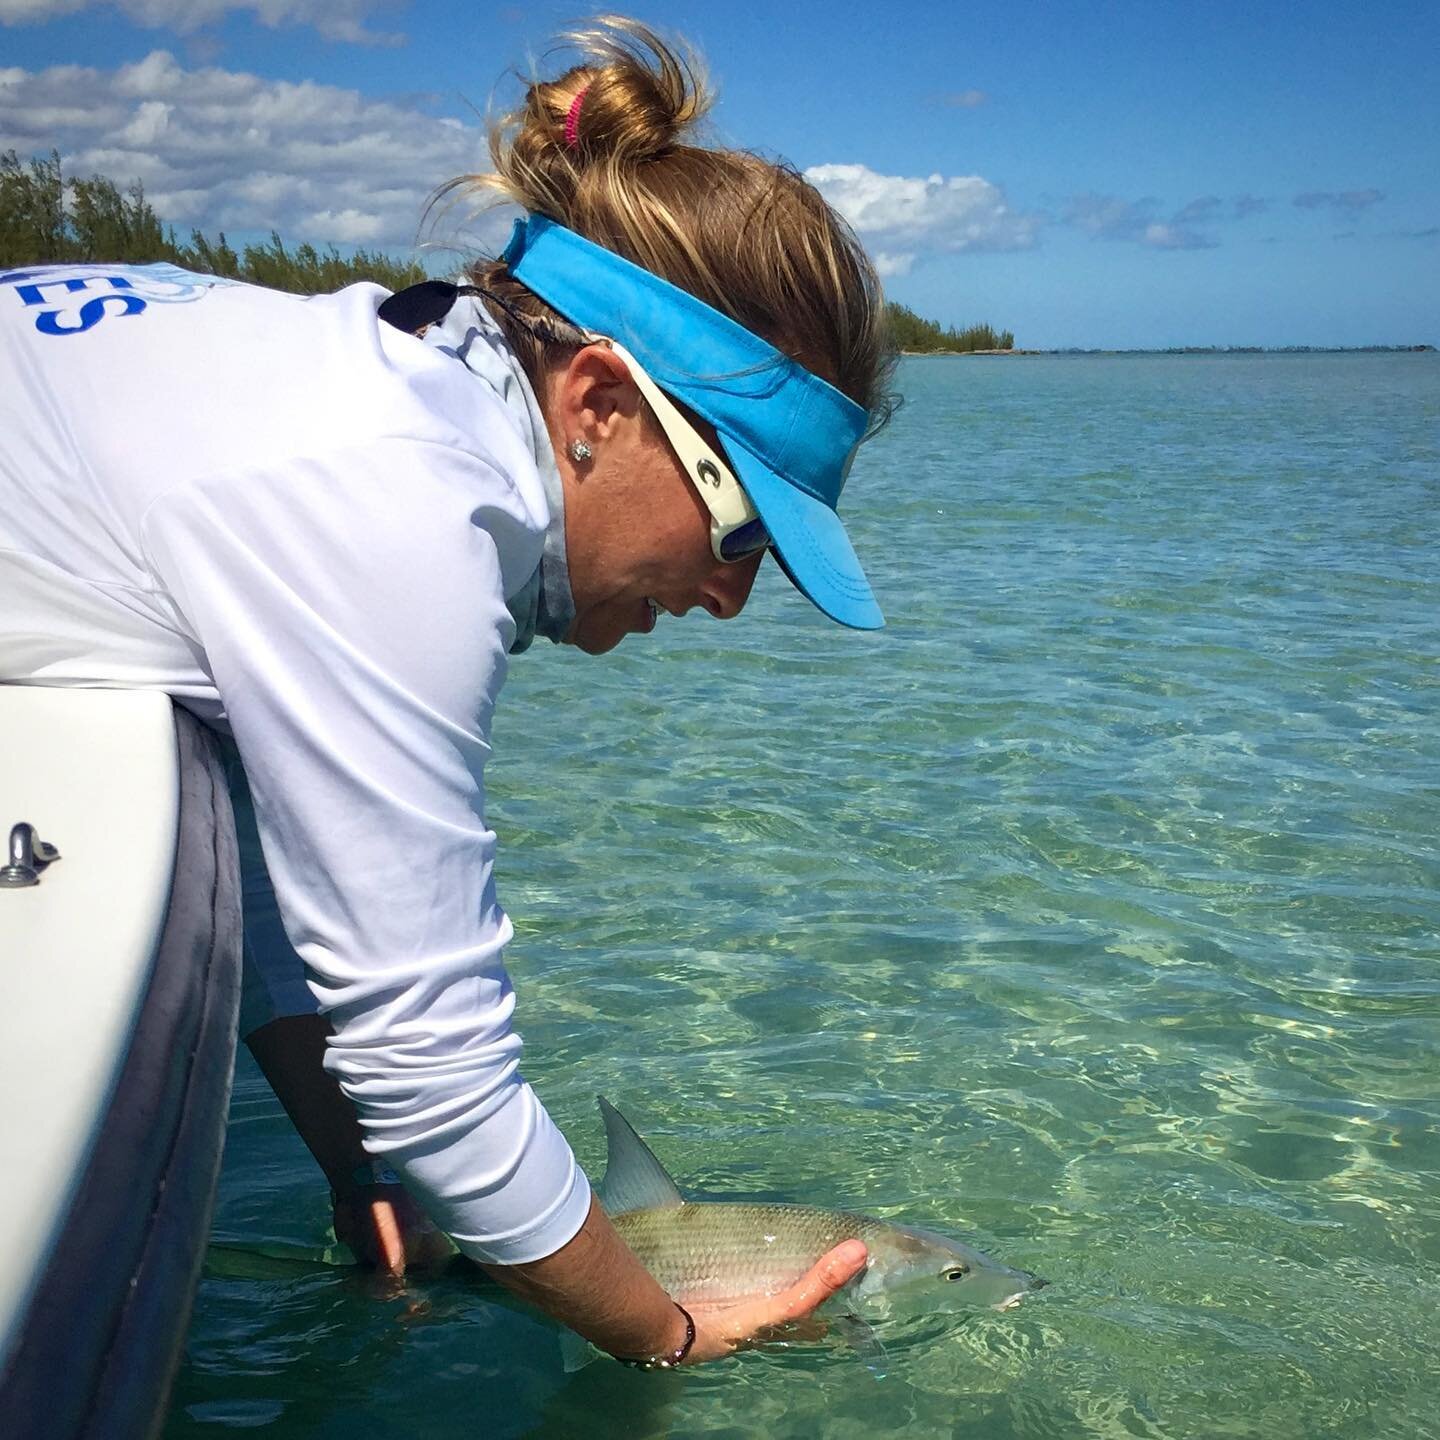 Missing the Bahamas this winter and chasing bonefish...hopefully next winter I&rsquo;ll be back, but for now a pretty release of one of the most badass gamefish on the planet from last year. 
.
.
.
#flyfishing #bahamas #bonefish #catchandrelease #sal